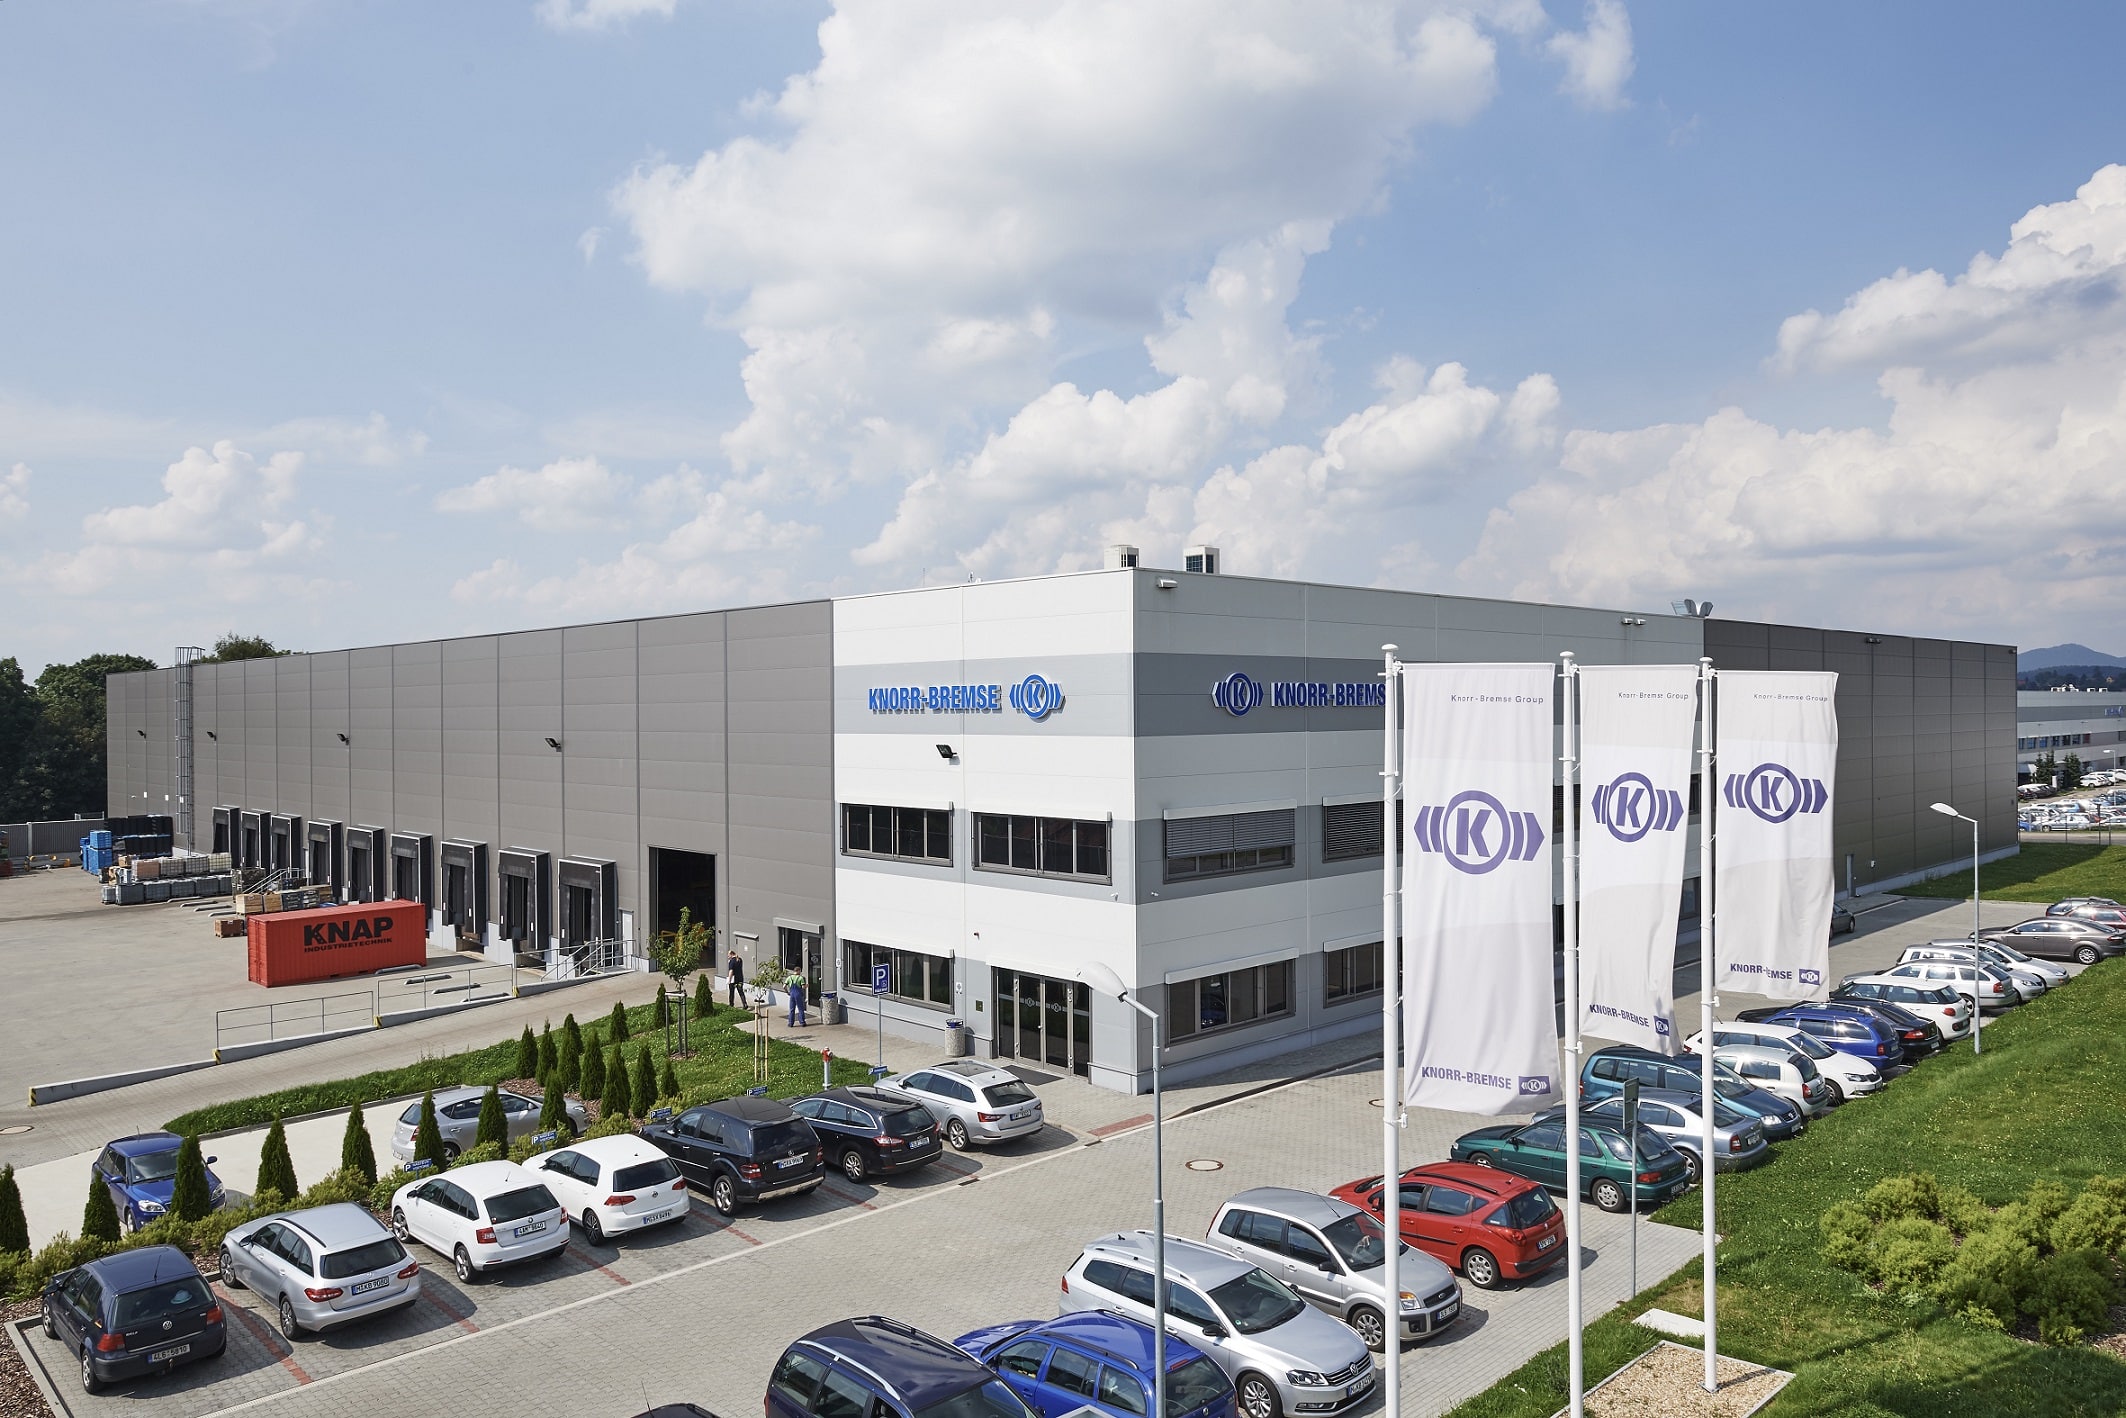 Knorr Bremse remanufacturing plant in Liberec